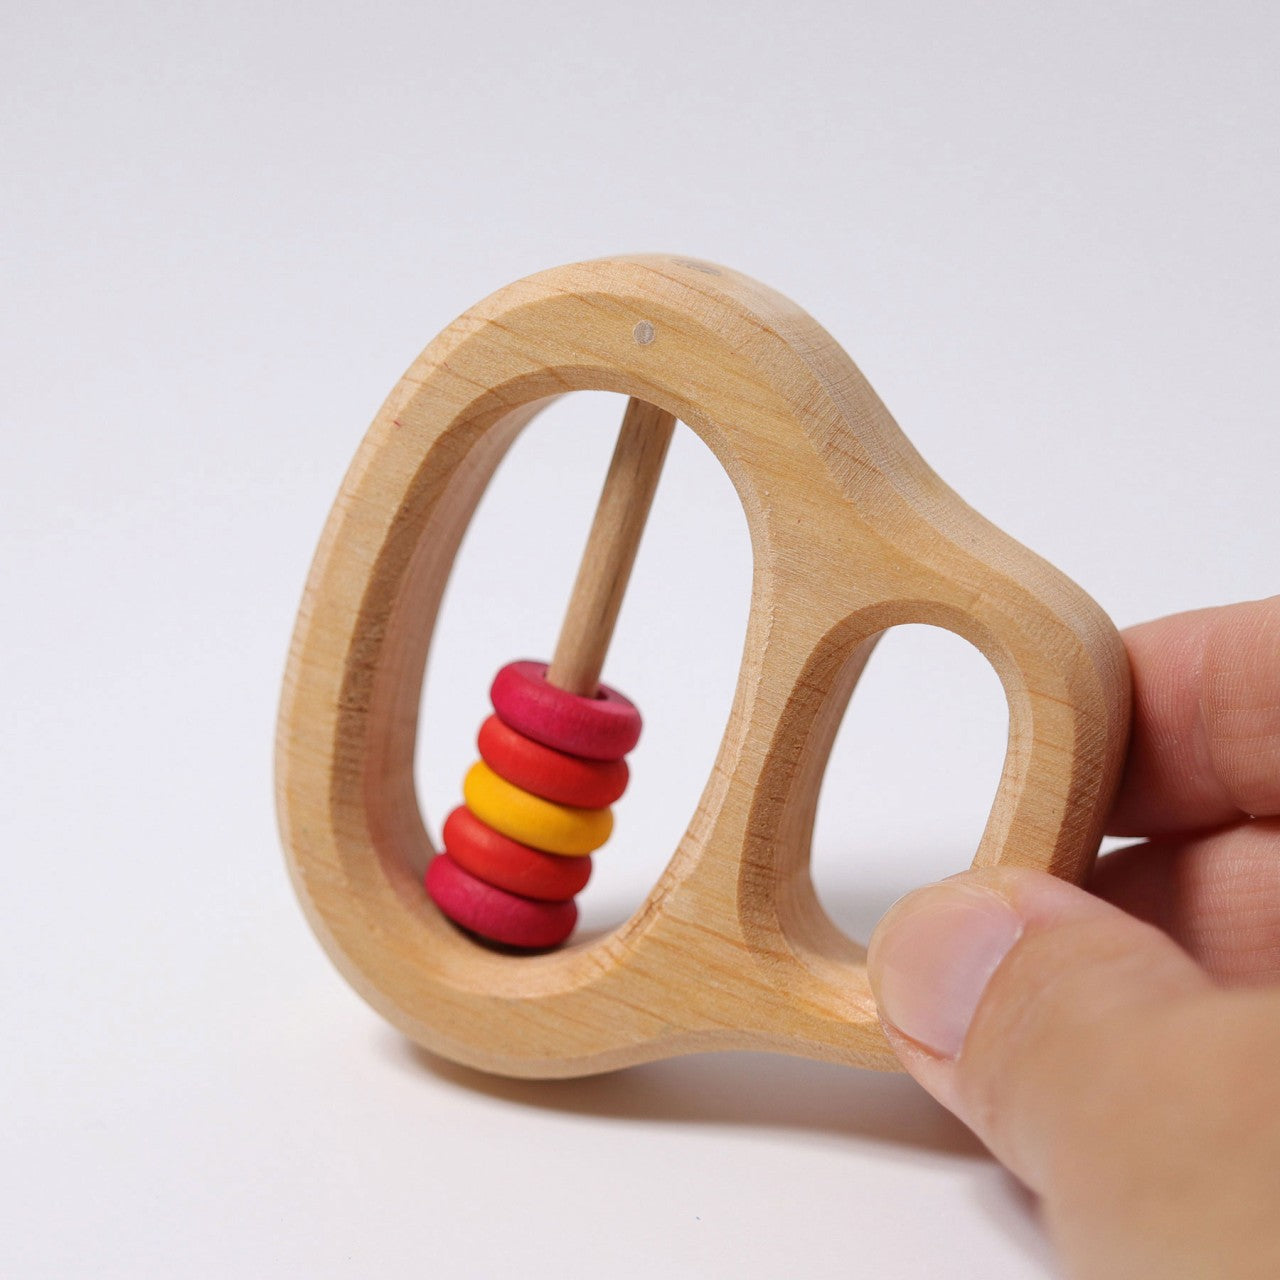 5 Red Rings Rattle & Clutching Toy | Baby’s First Wooden Toy